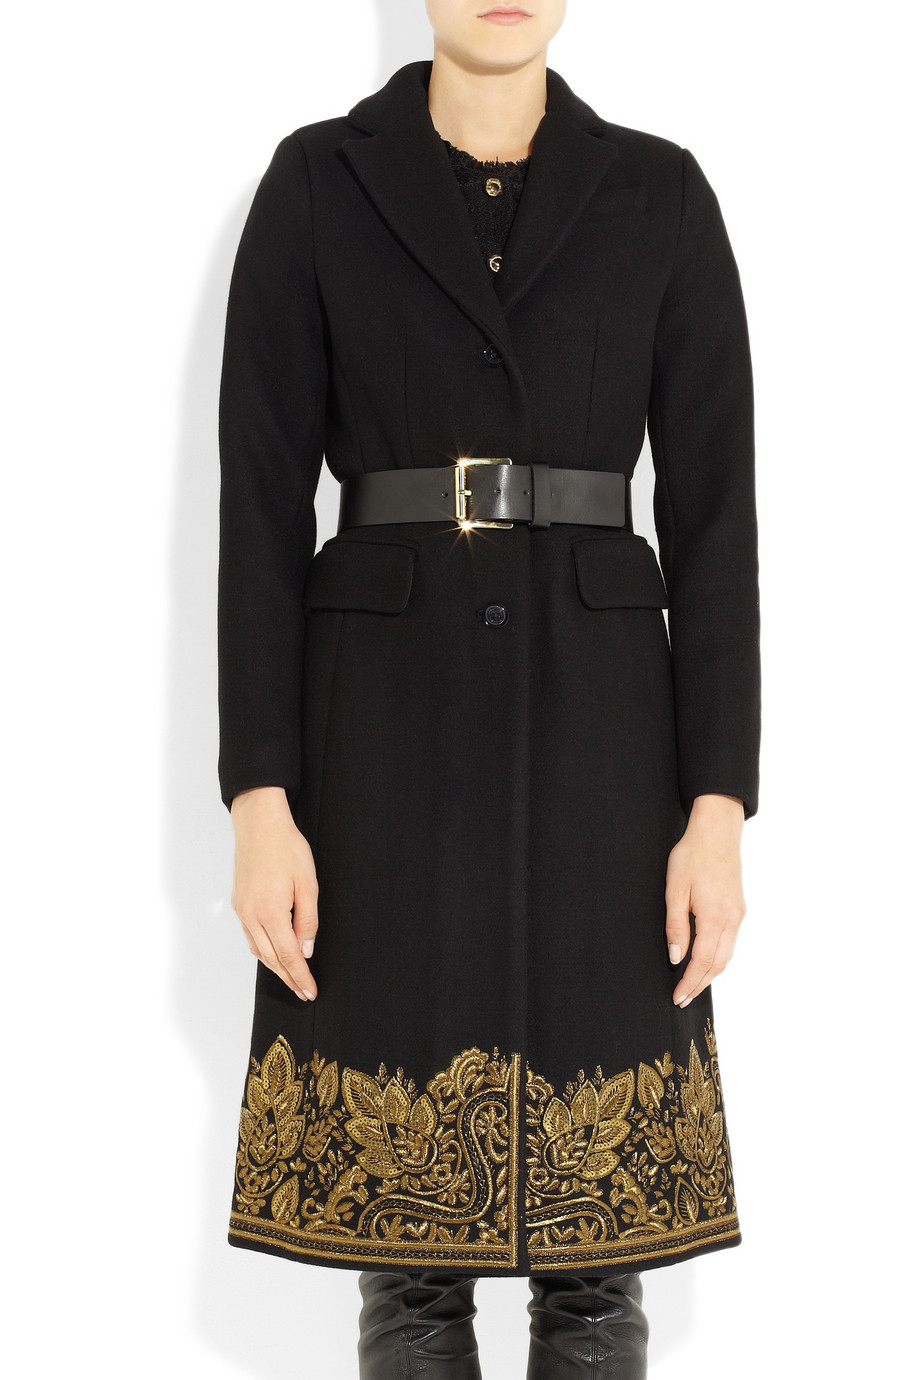 MICHAEL Michael Kors Shearling Trimmed Embroidered Wool Blend Coat in